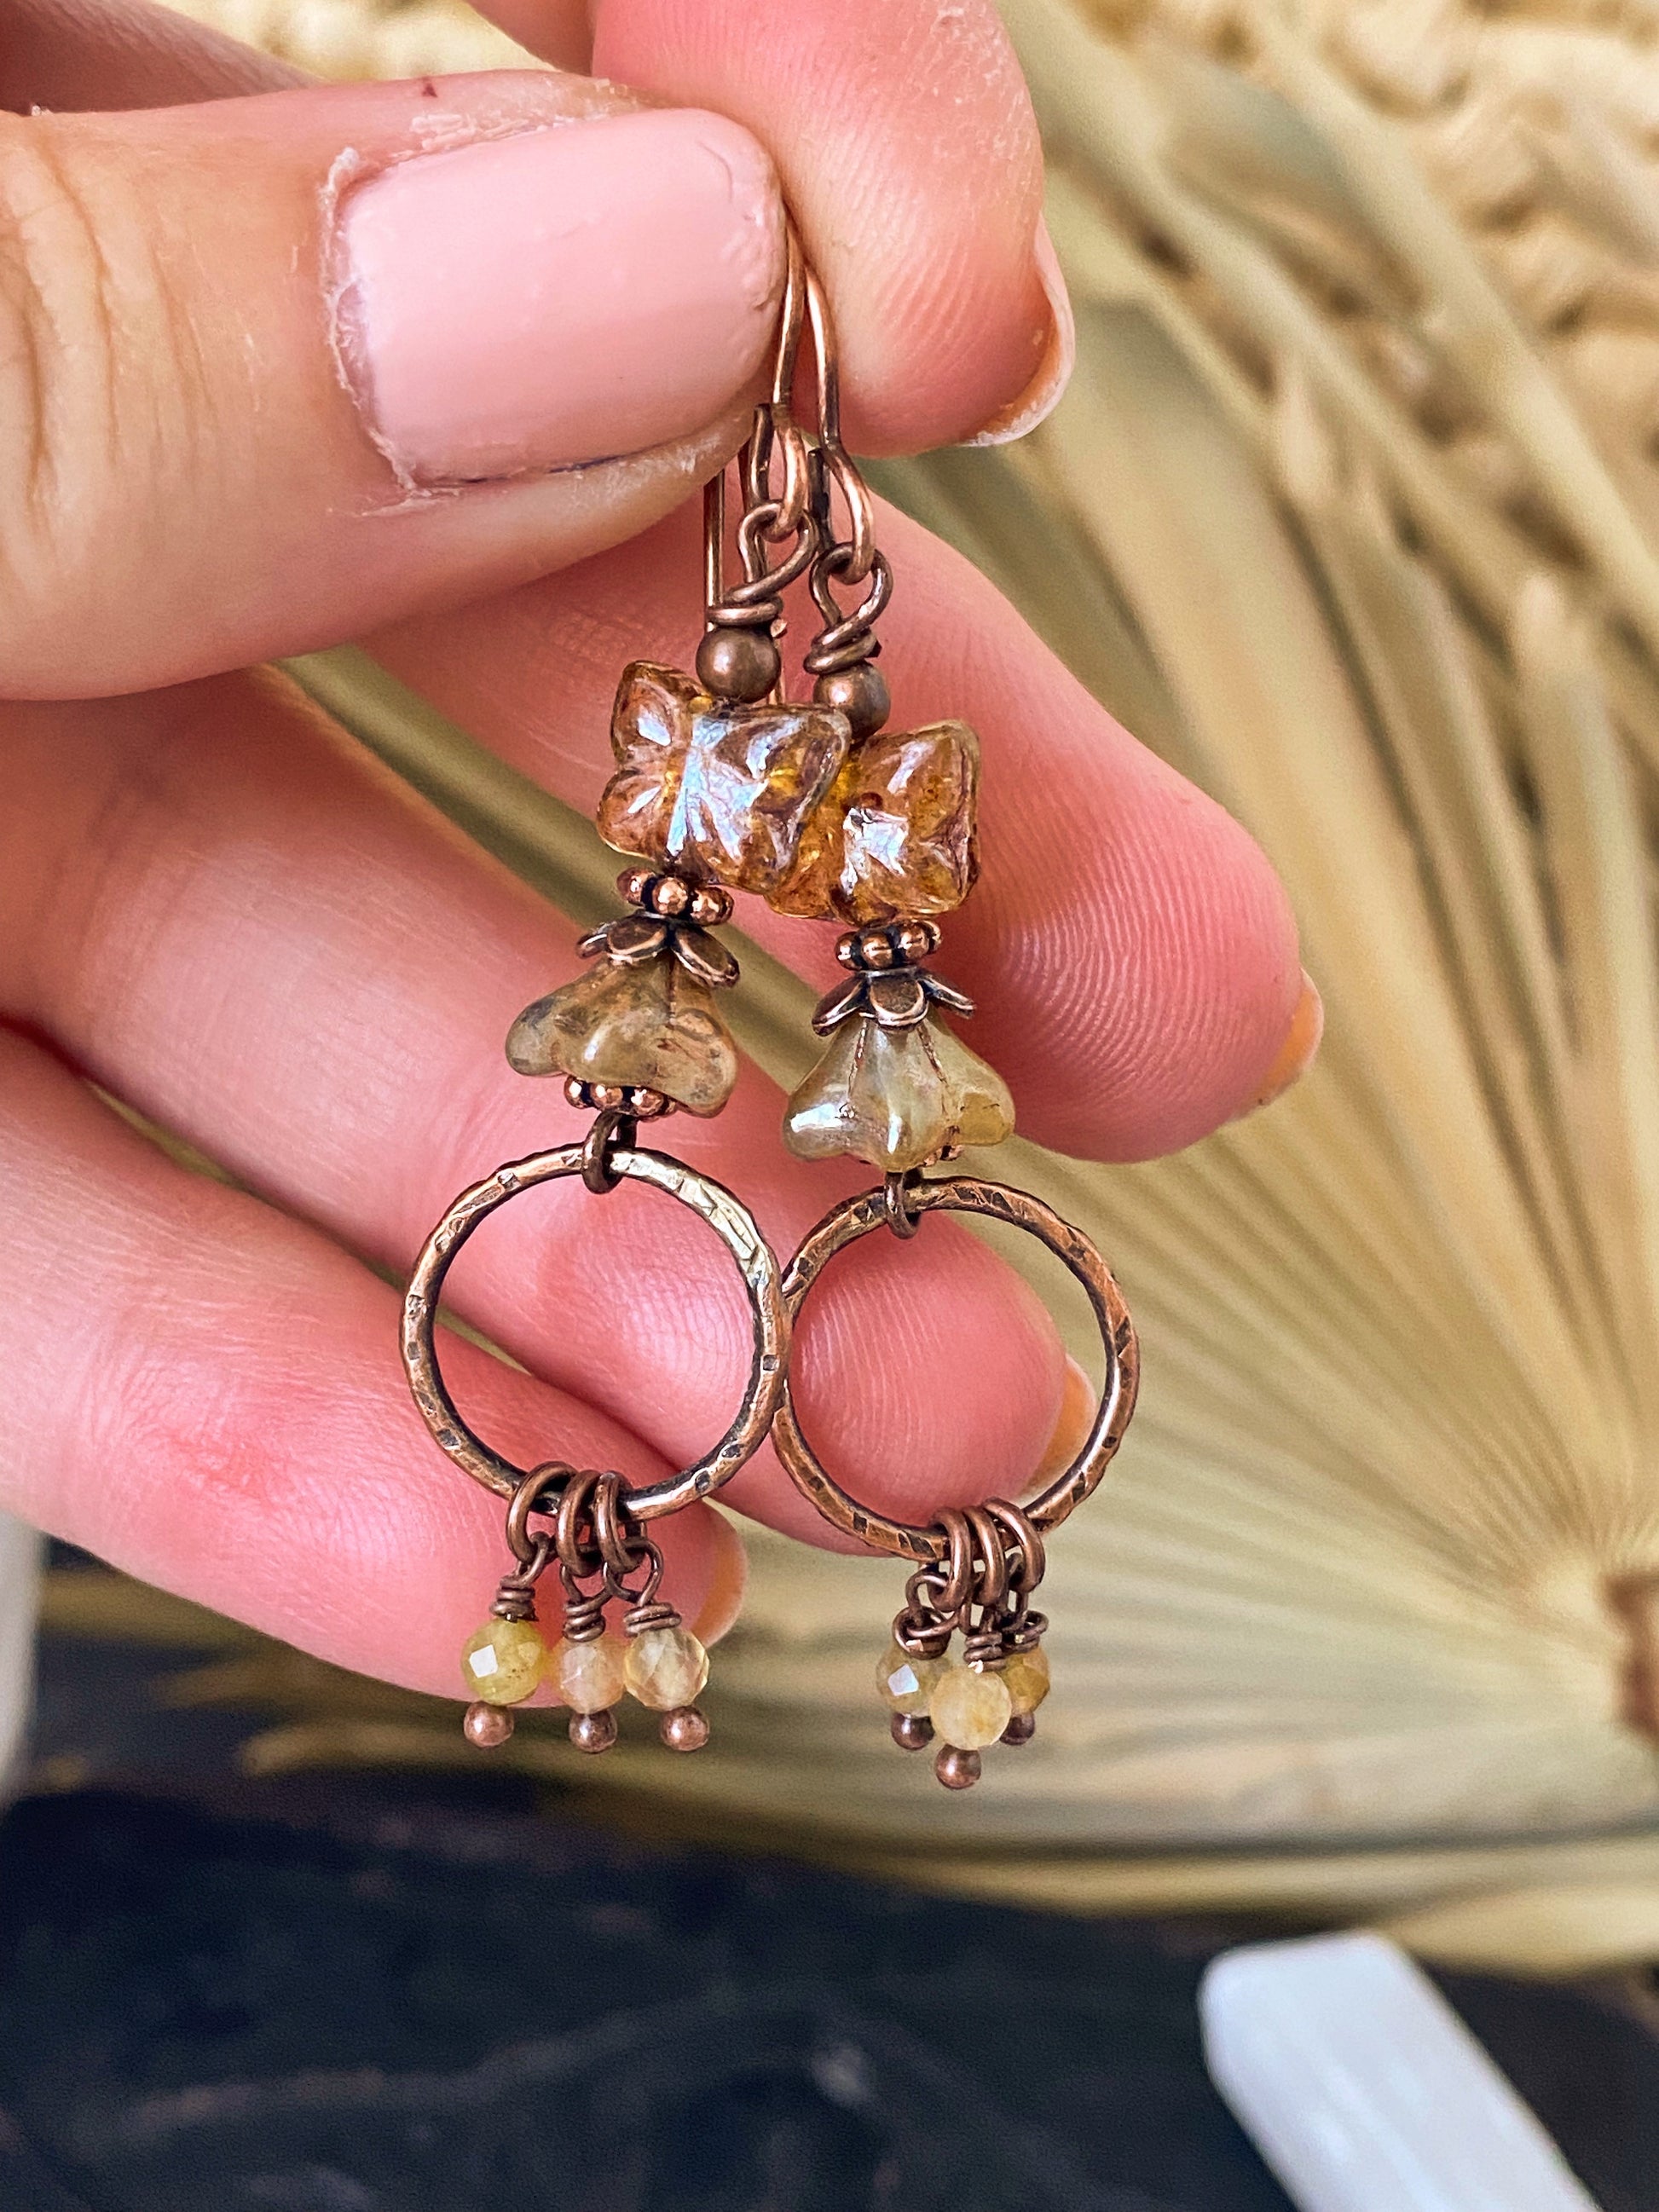 Butterfly Czech glass, citrine stone and copper metal earrings - Andria Bieber Designs 